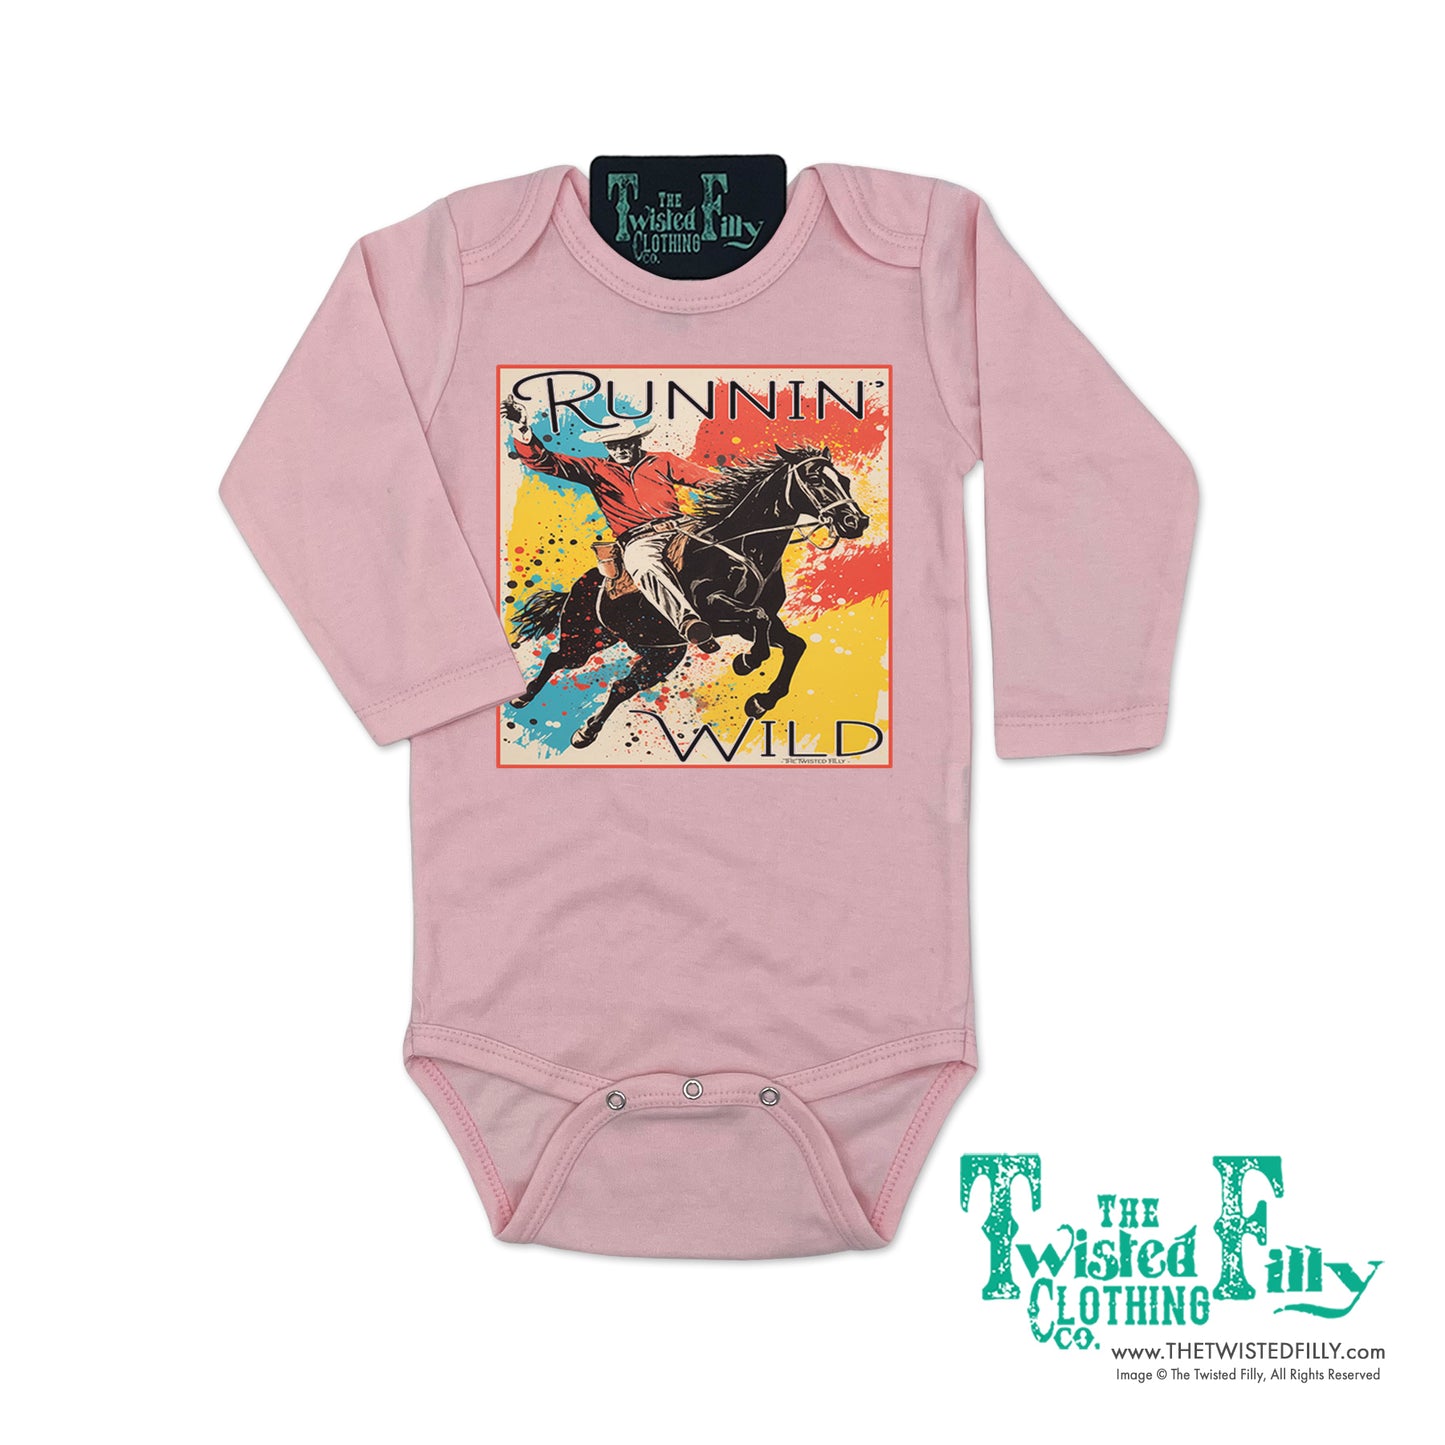 Runnin' Wild - L/S Infant One Piece - Assorted Colors